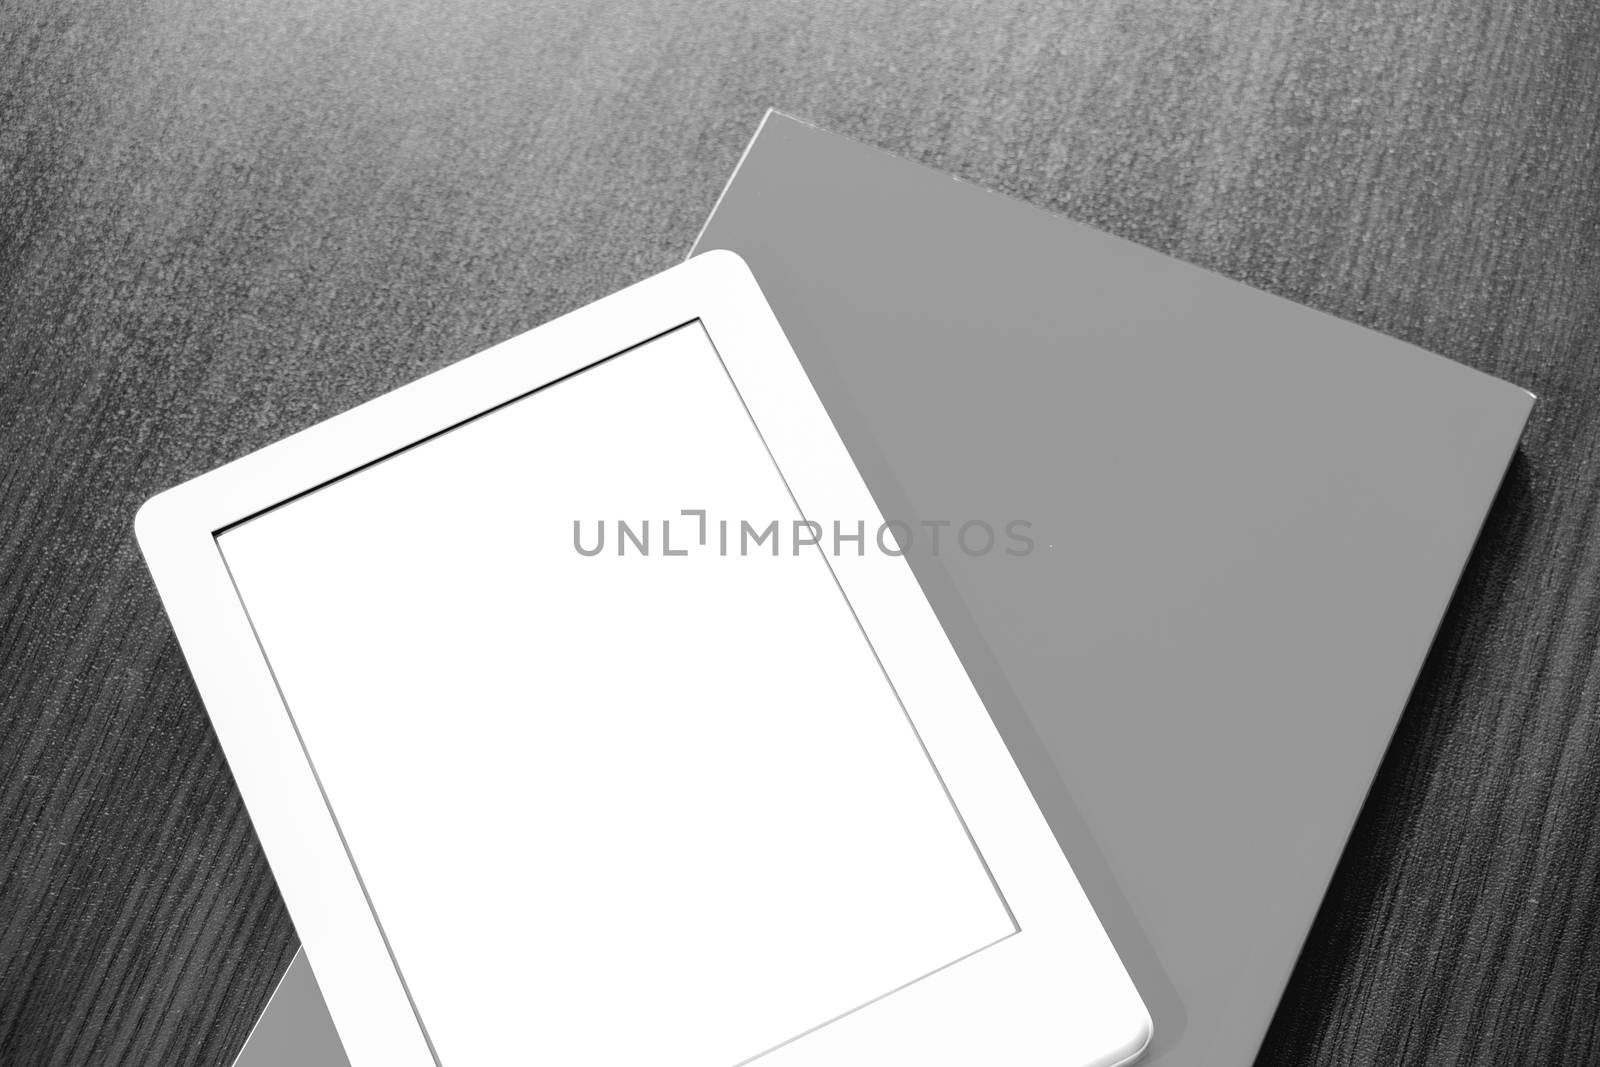 On the table is a portable e-book and paper book